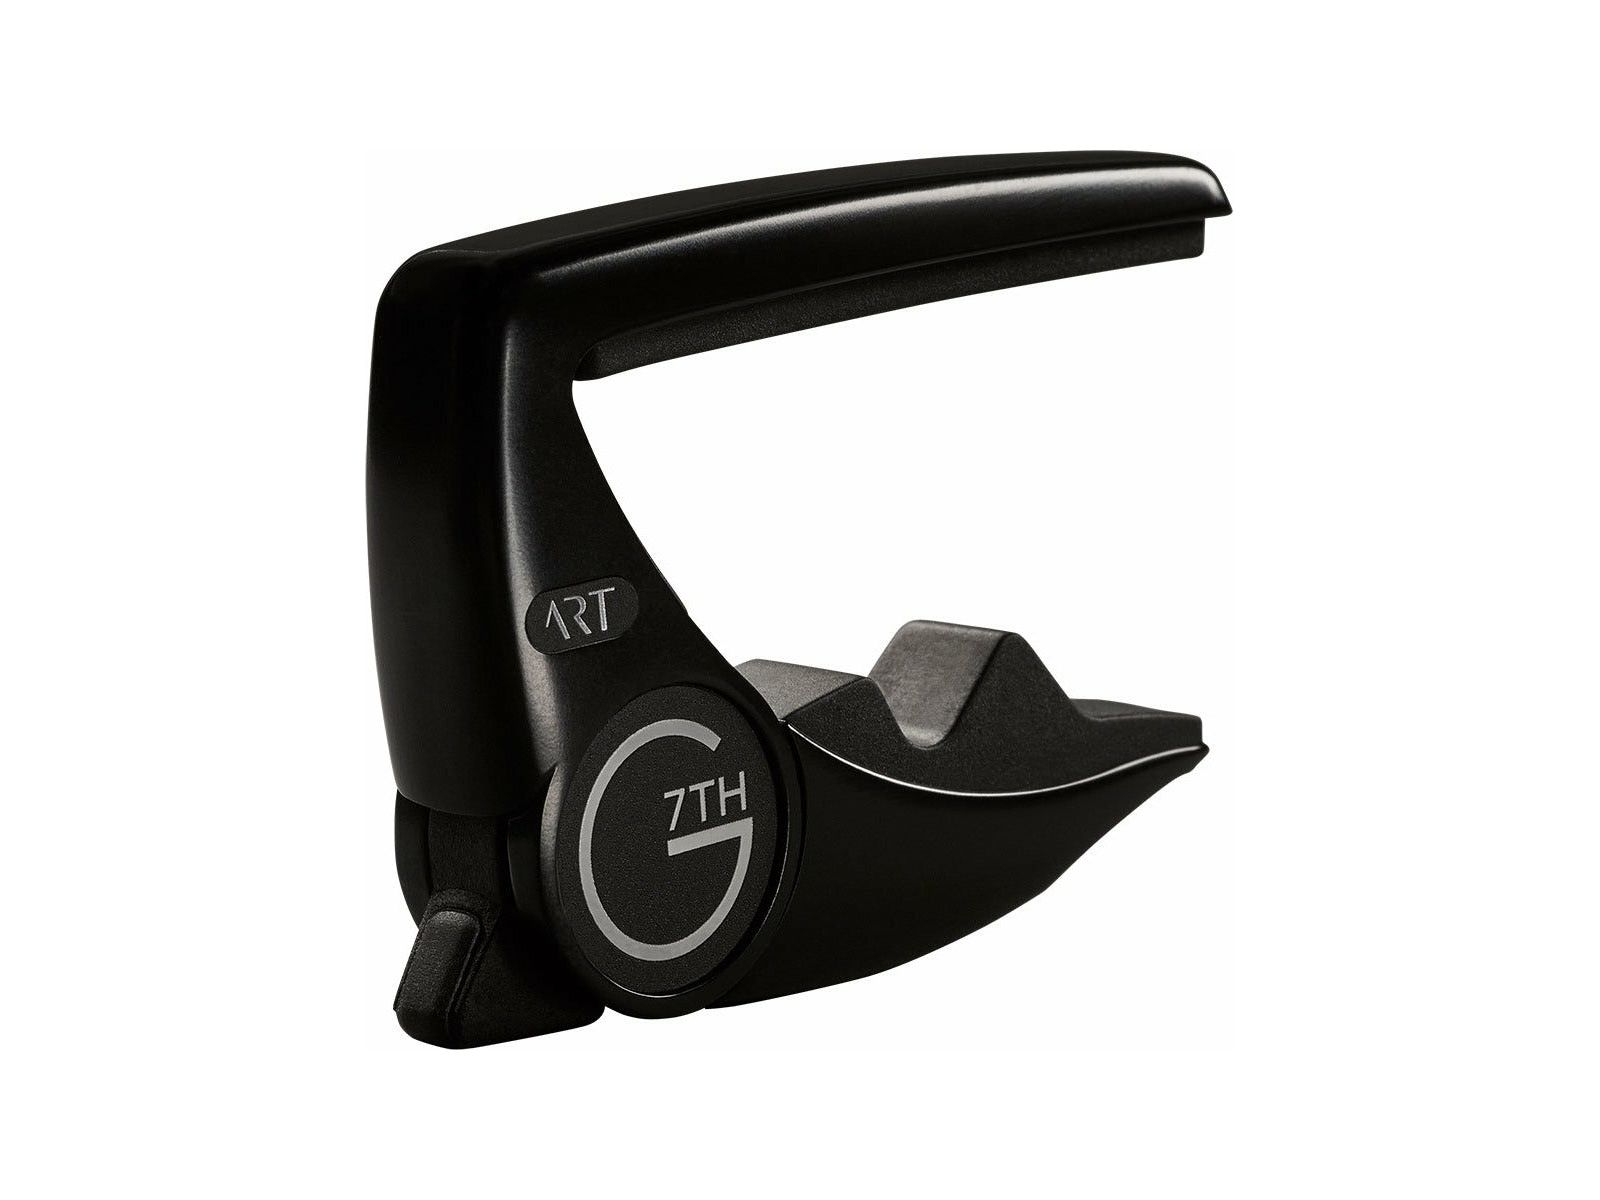 G7th Capo Performance 3 Acoustic/Electric Guitar Black